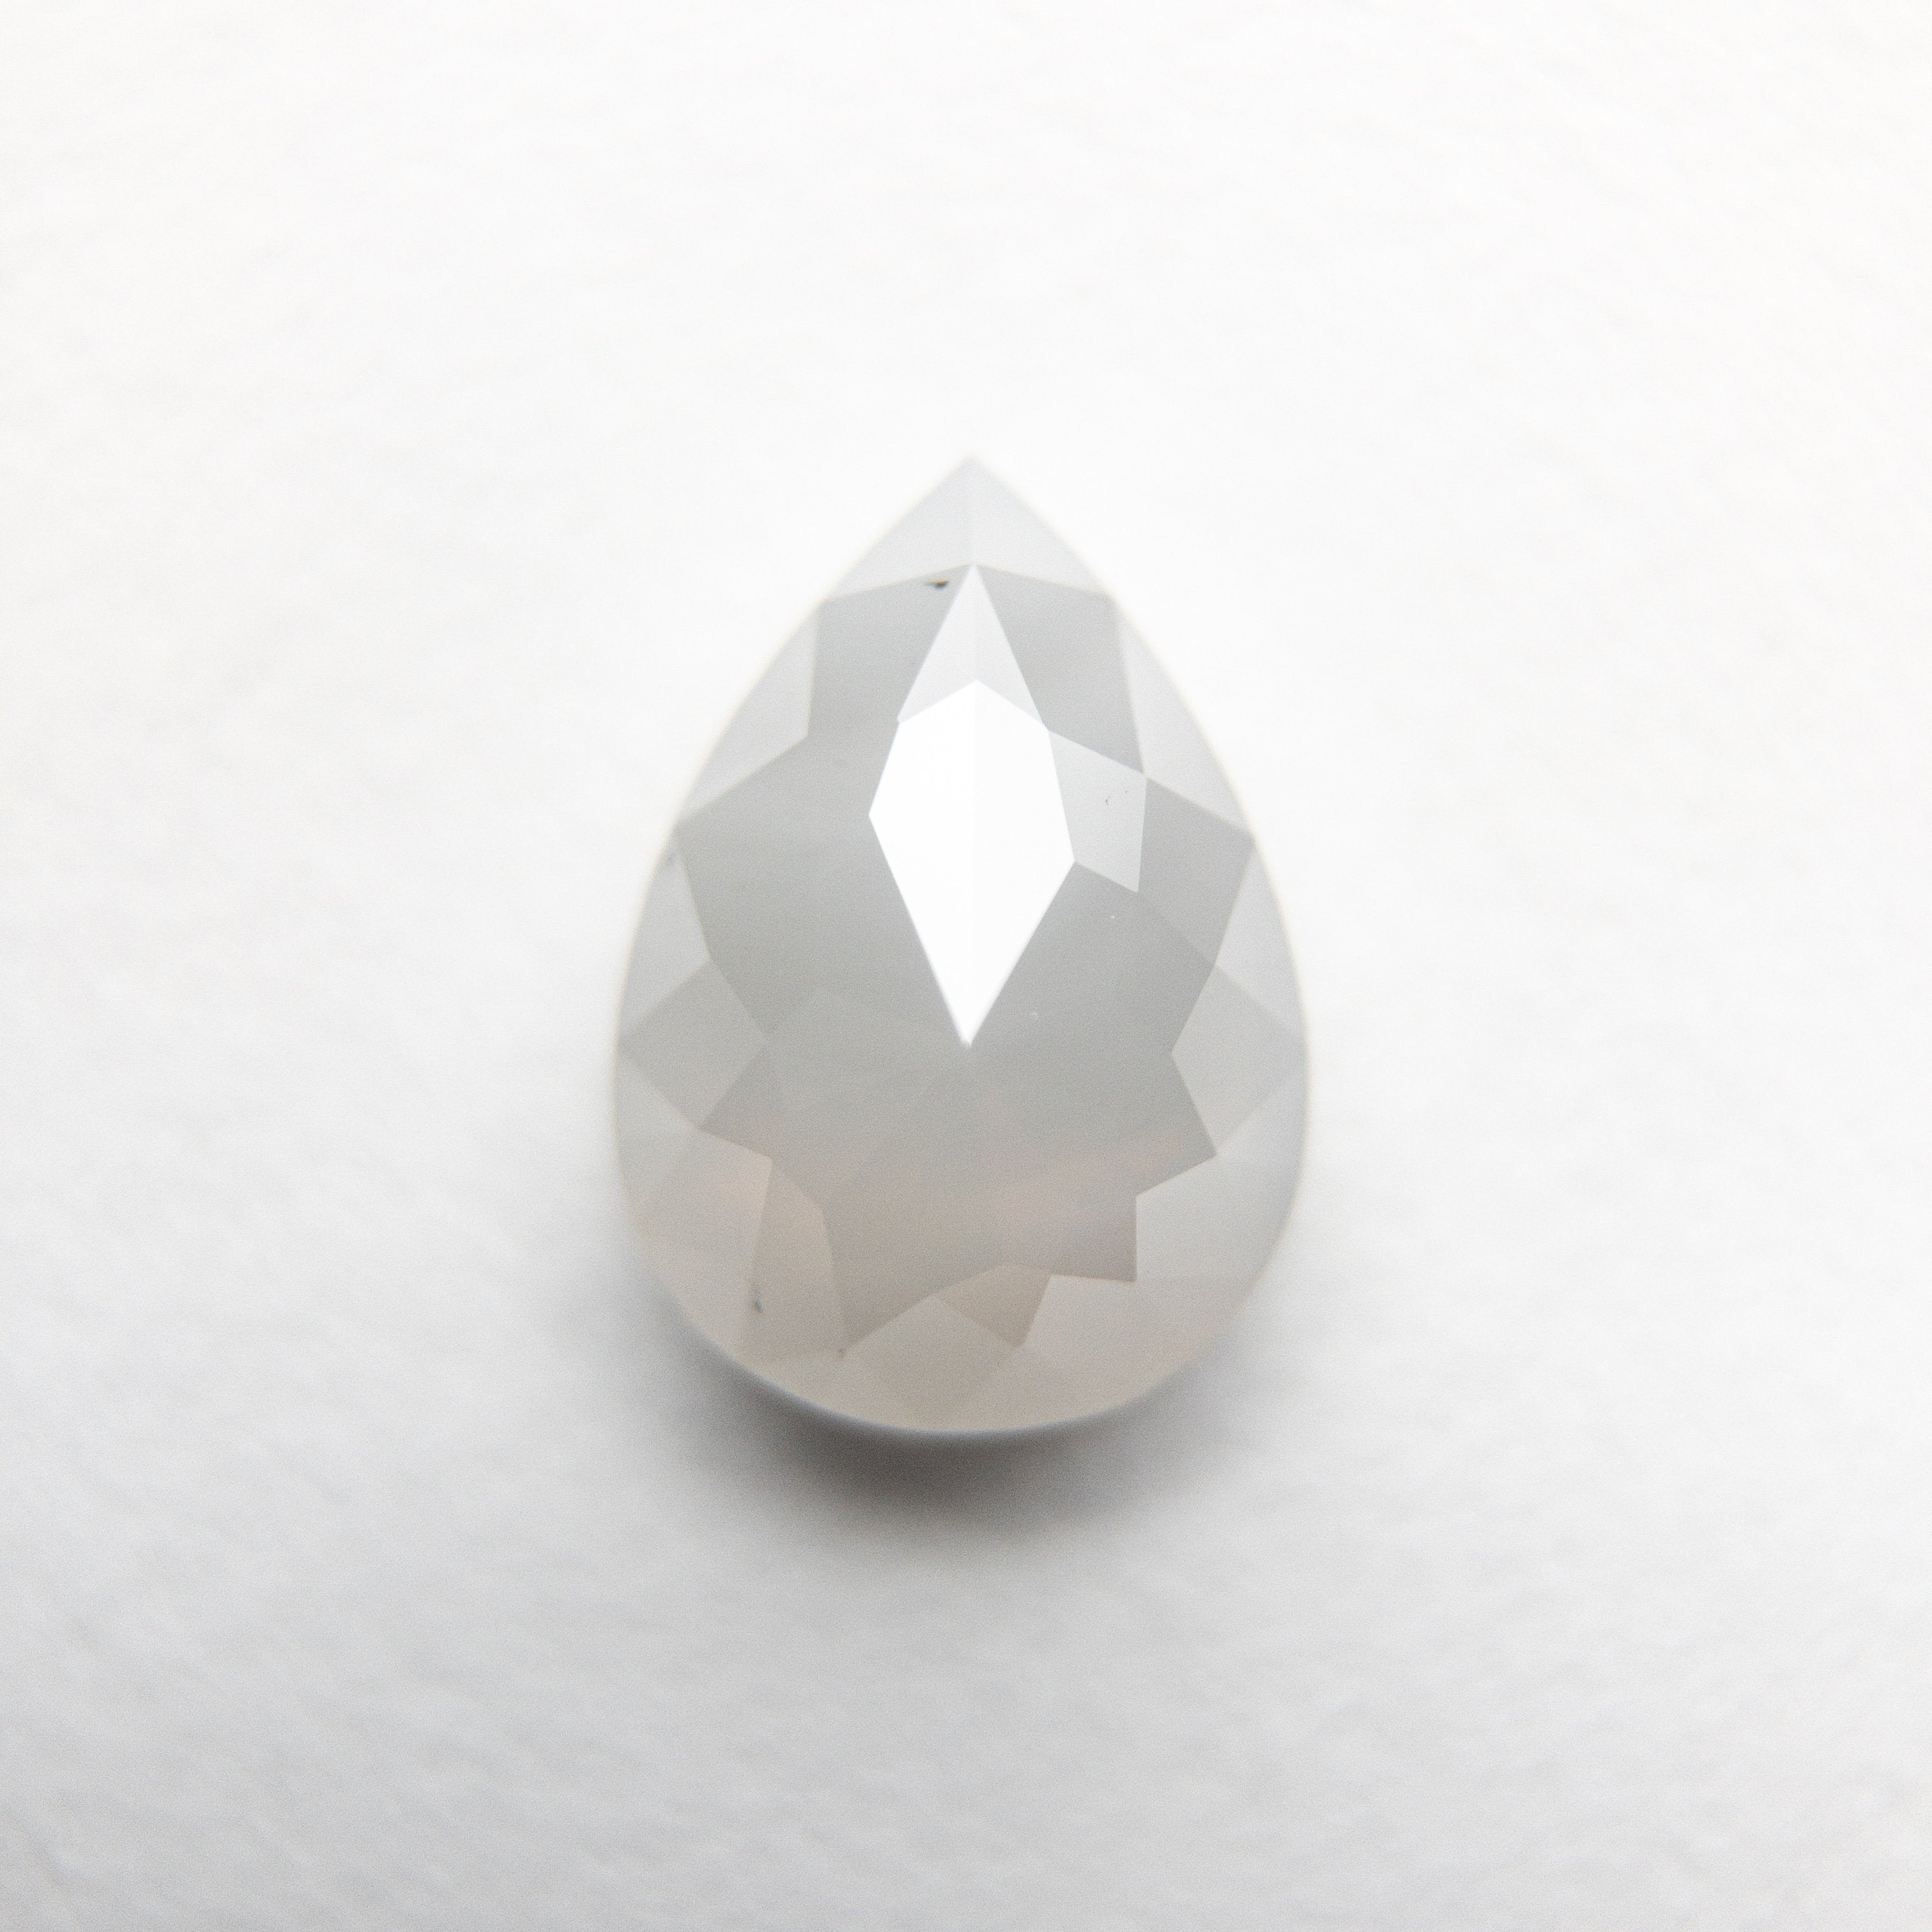 0.89ct 7.60x5.45x3.05mm Pear Double Cut 18399-04 HOLD D1877 2.4.21